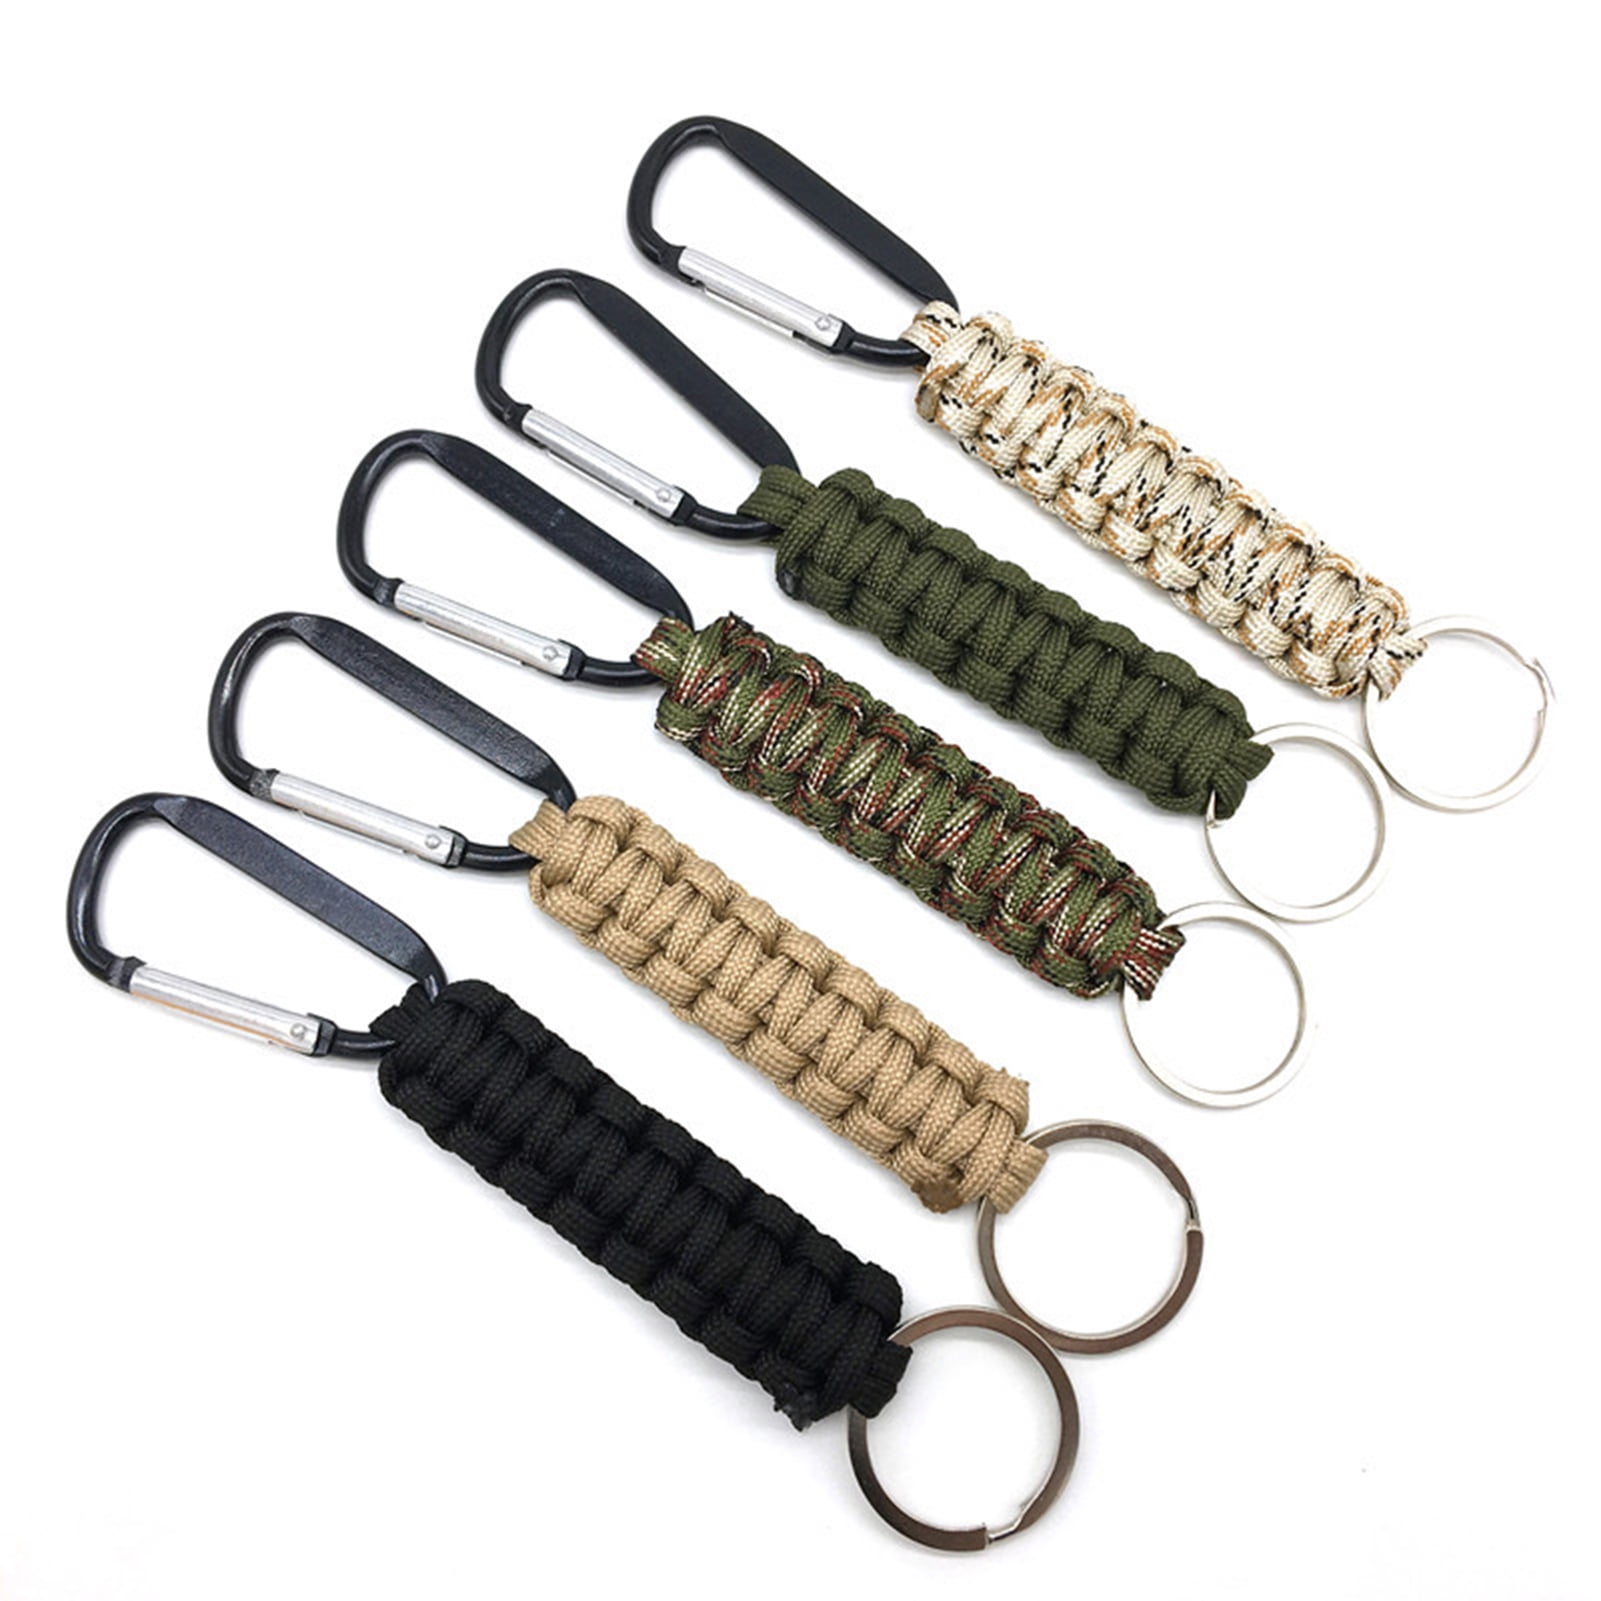 2 Pieces Paracord Keychain with Chain Hooks Braided Lanyard Keyring Lanyard Heavy Duty Holder Hangers Survival Kits for Car Keys Bottles Camping Hiking Survival Green and Black